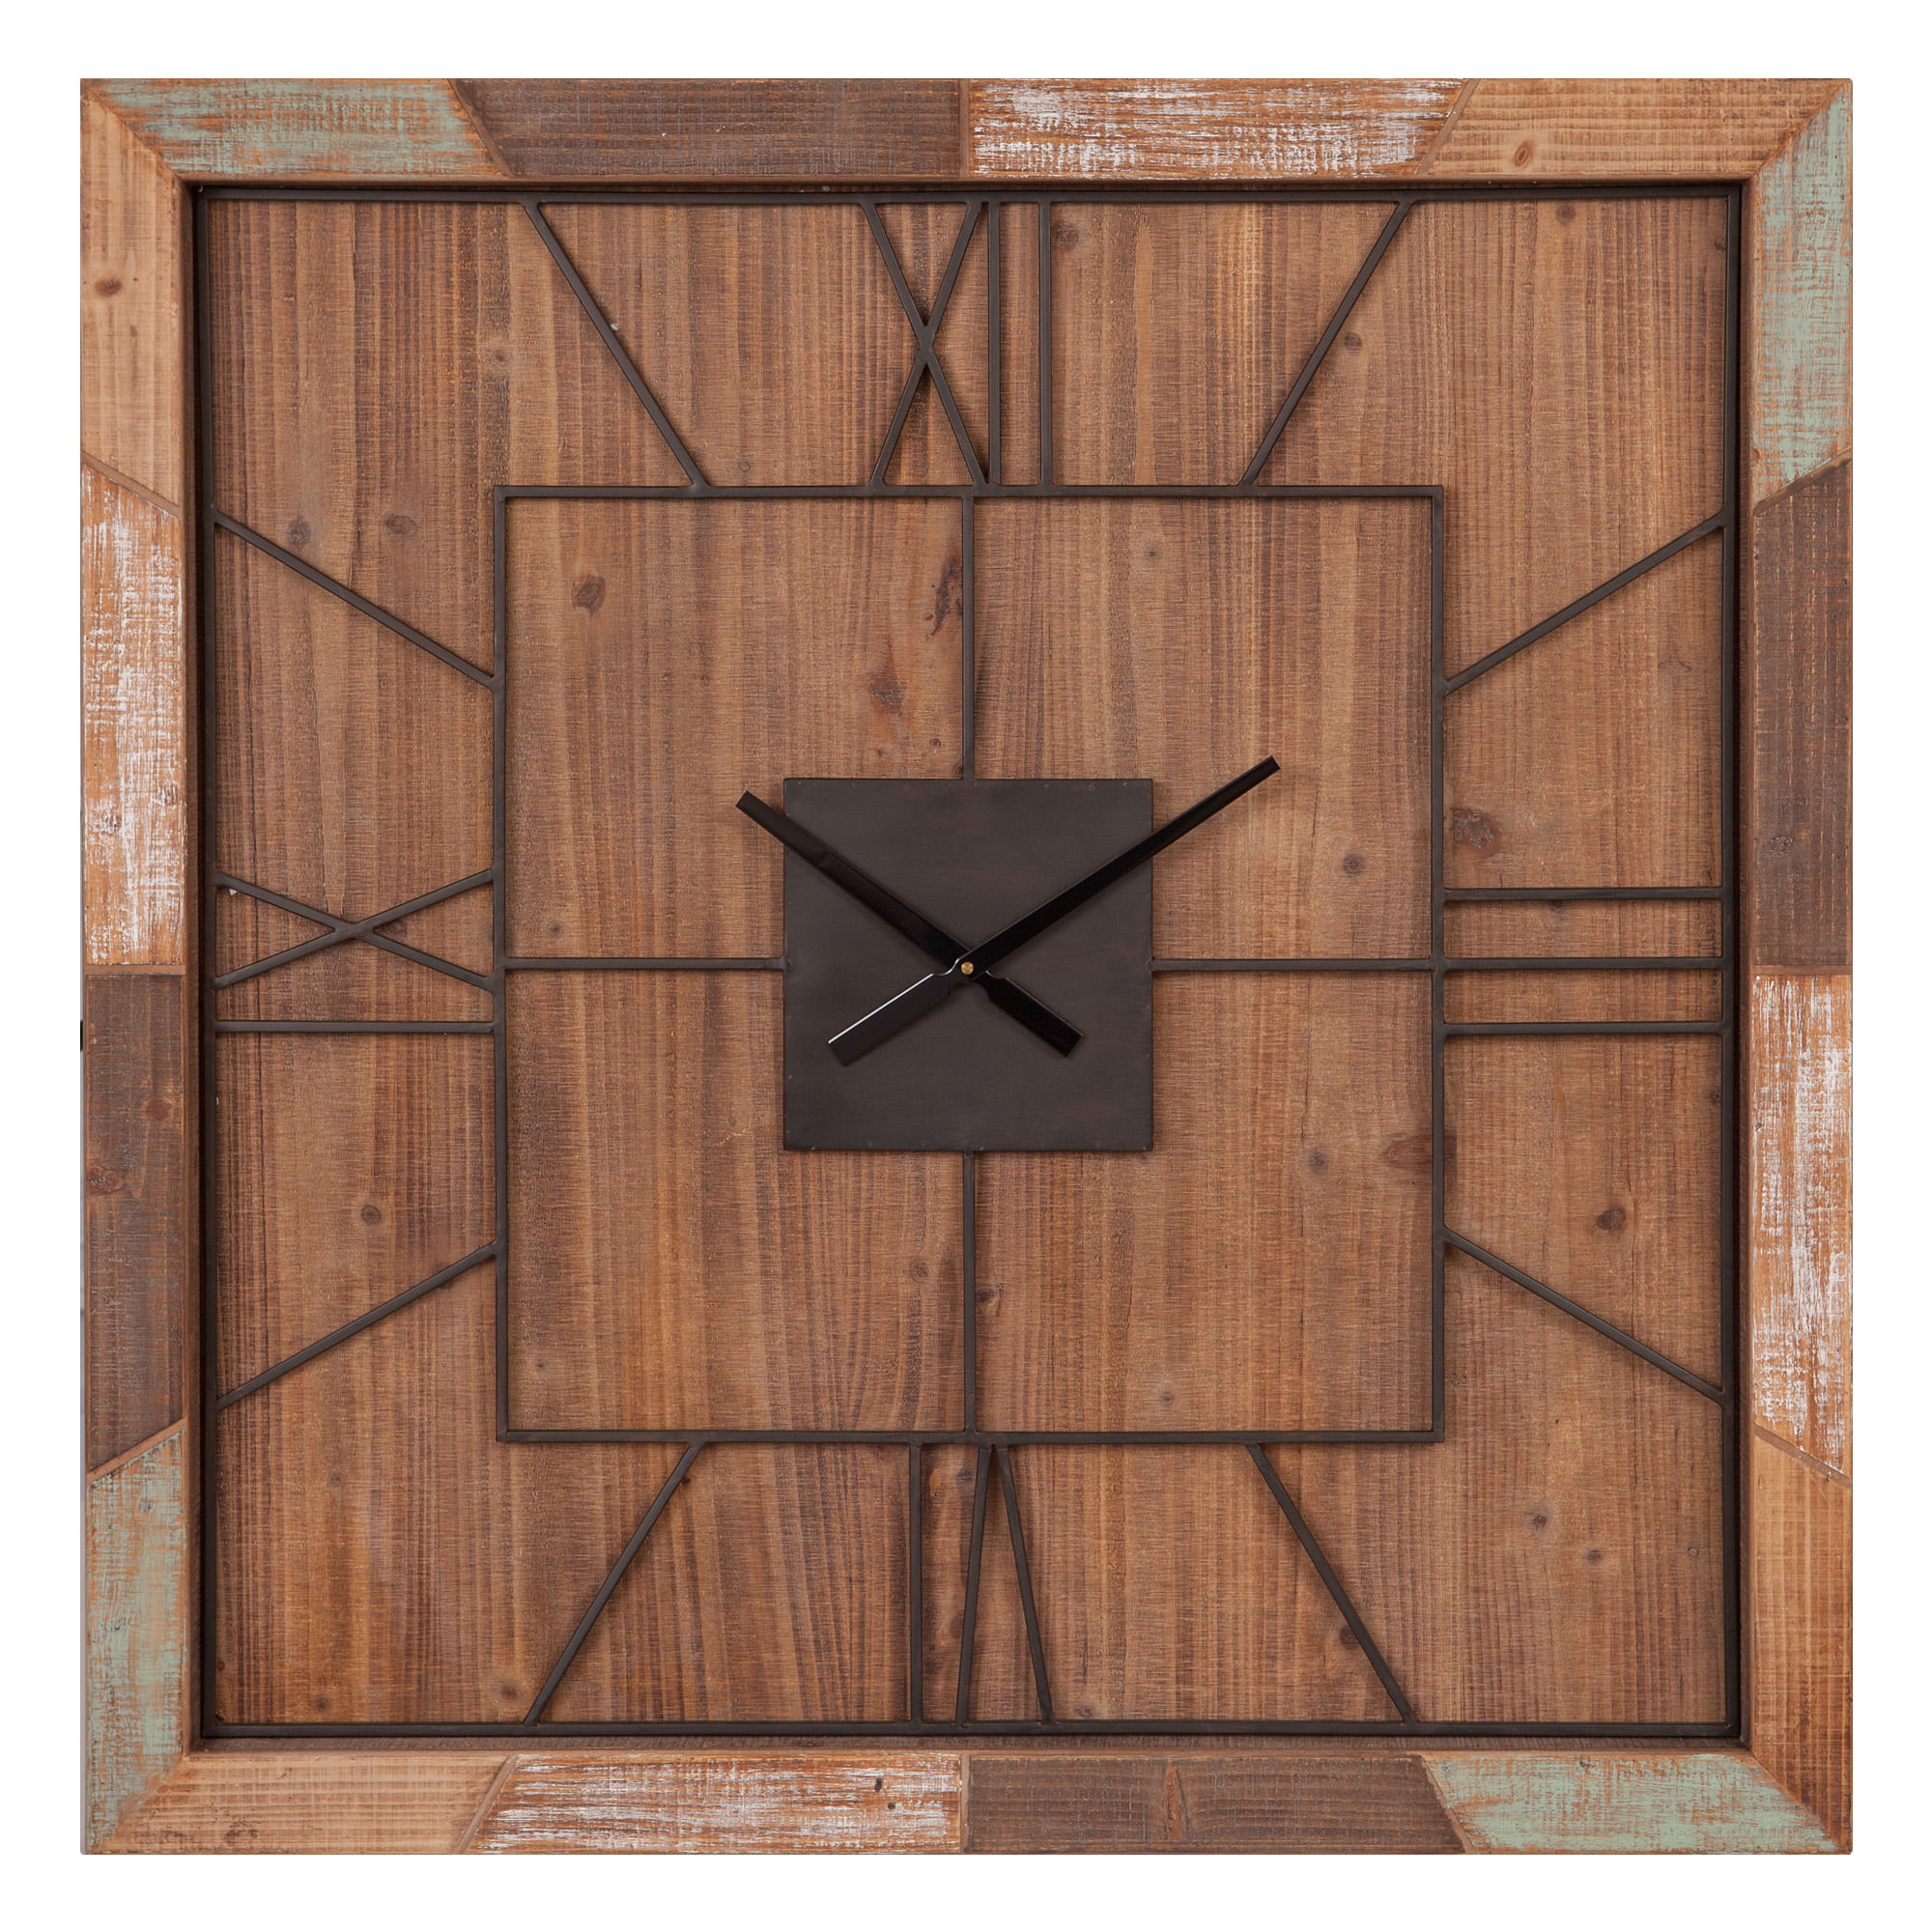 INTERESTPRINT USA Flag in Grunge Design Placed on Old Wooden Planks Decorative Wall Clock for Wall Decor